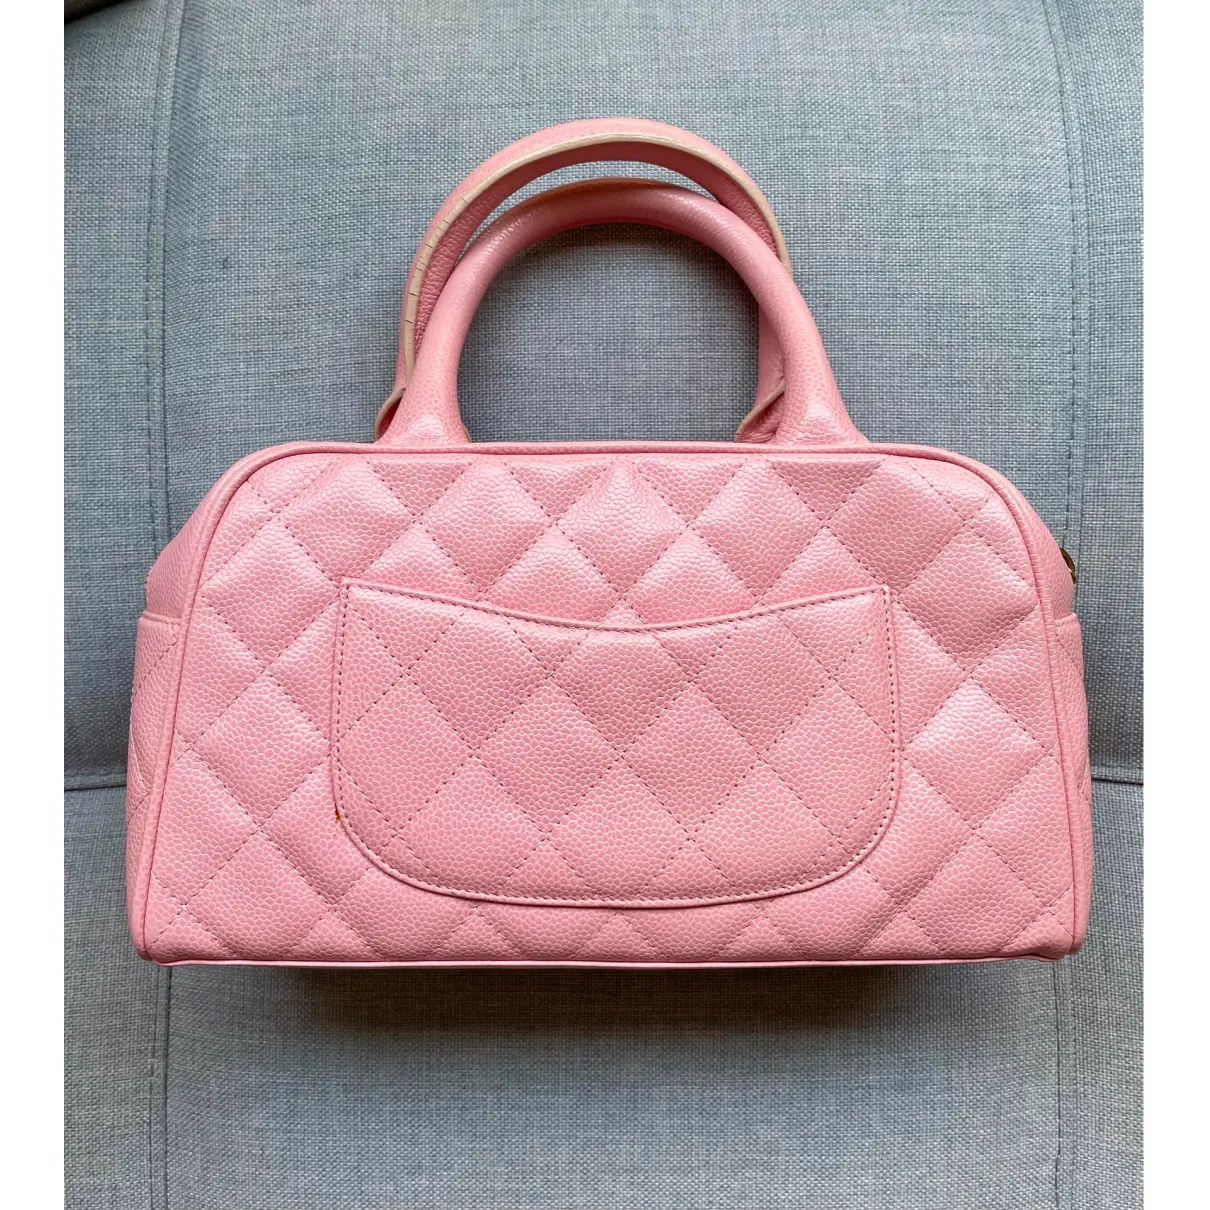 Buy Chanel Leather bowling bag online